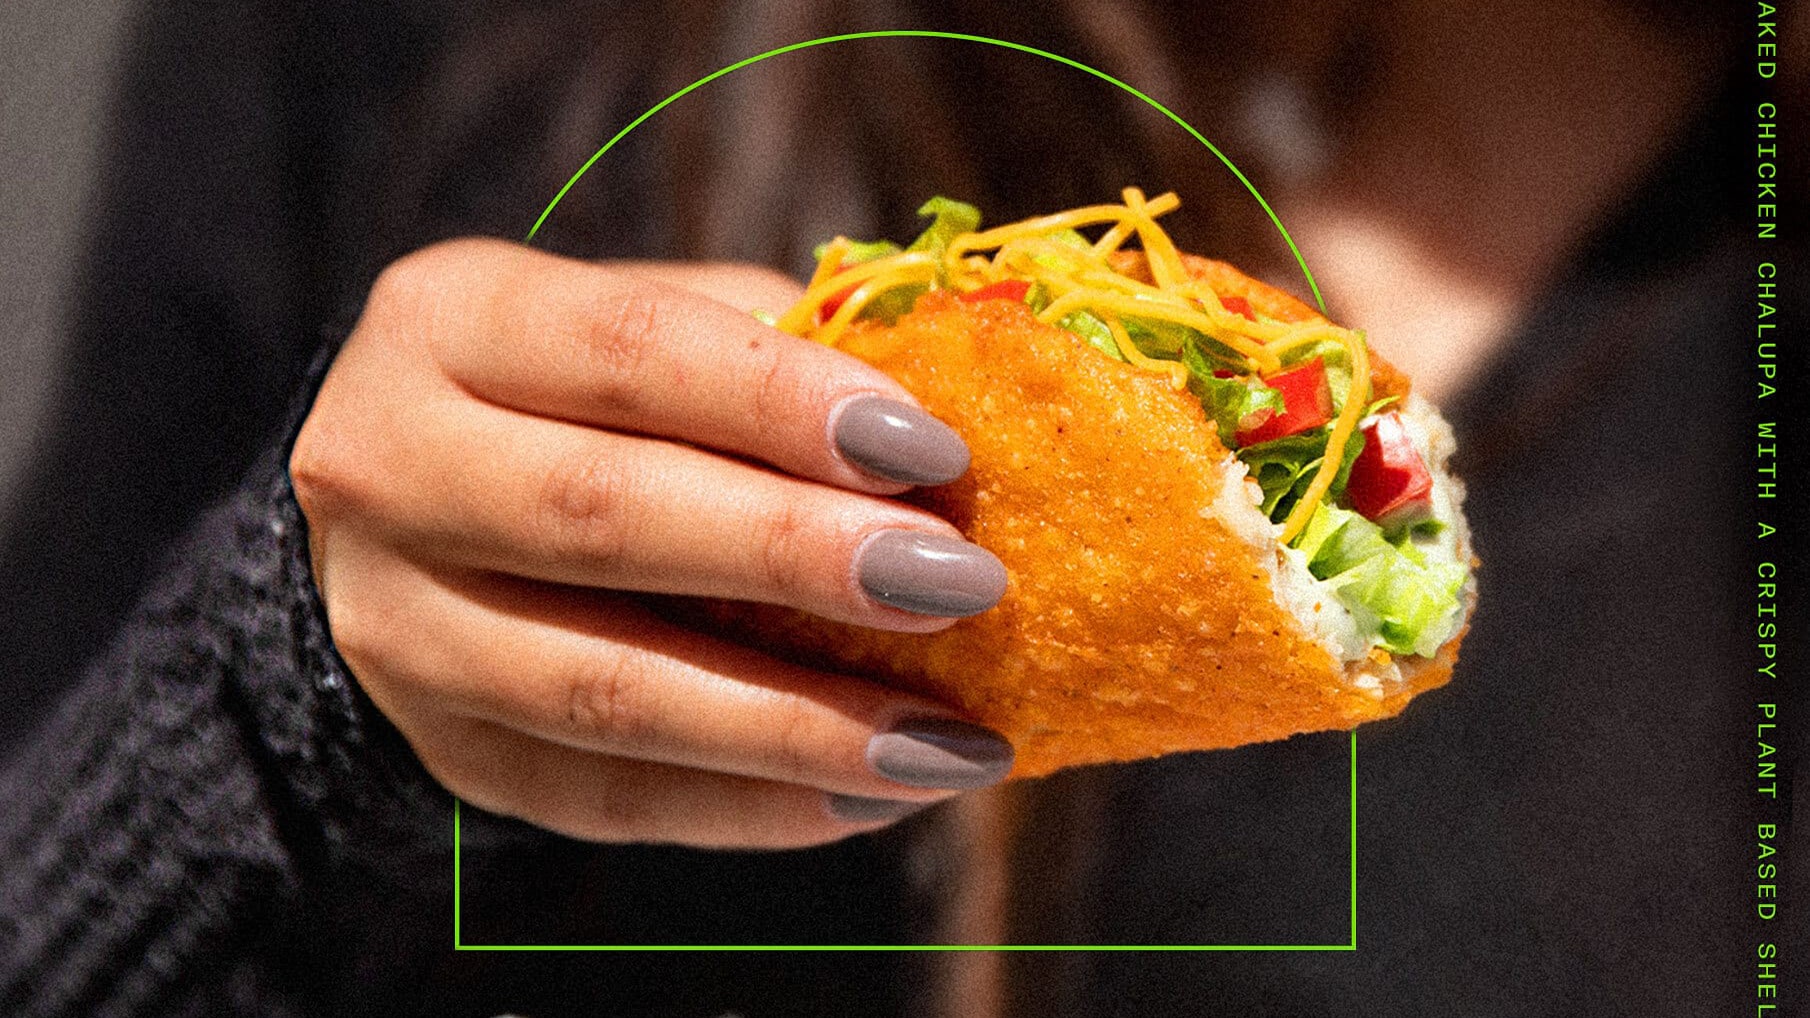 Taco Bell testing plant-based shell on new Naked Chicken Chalupa at this location